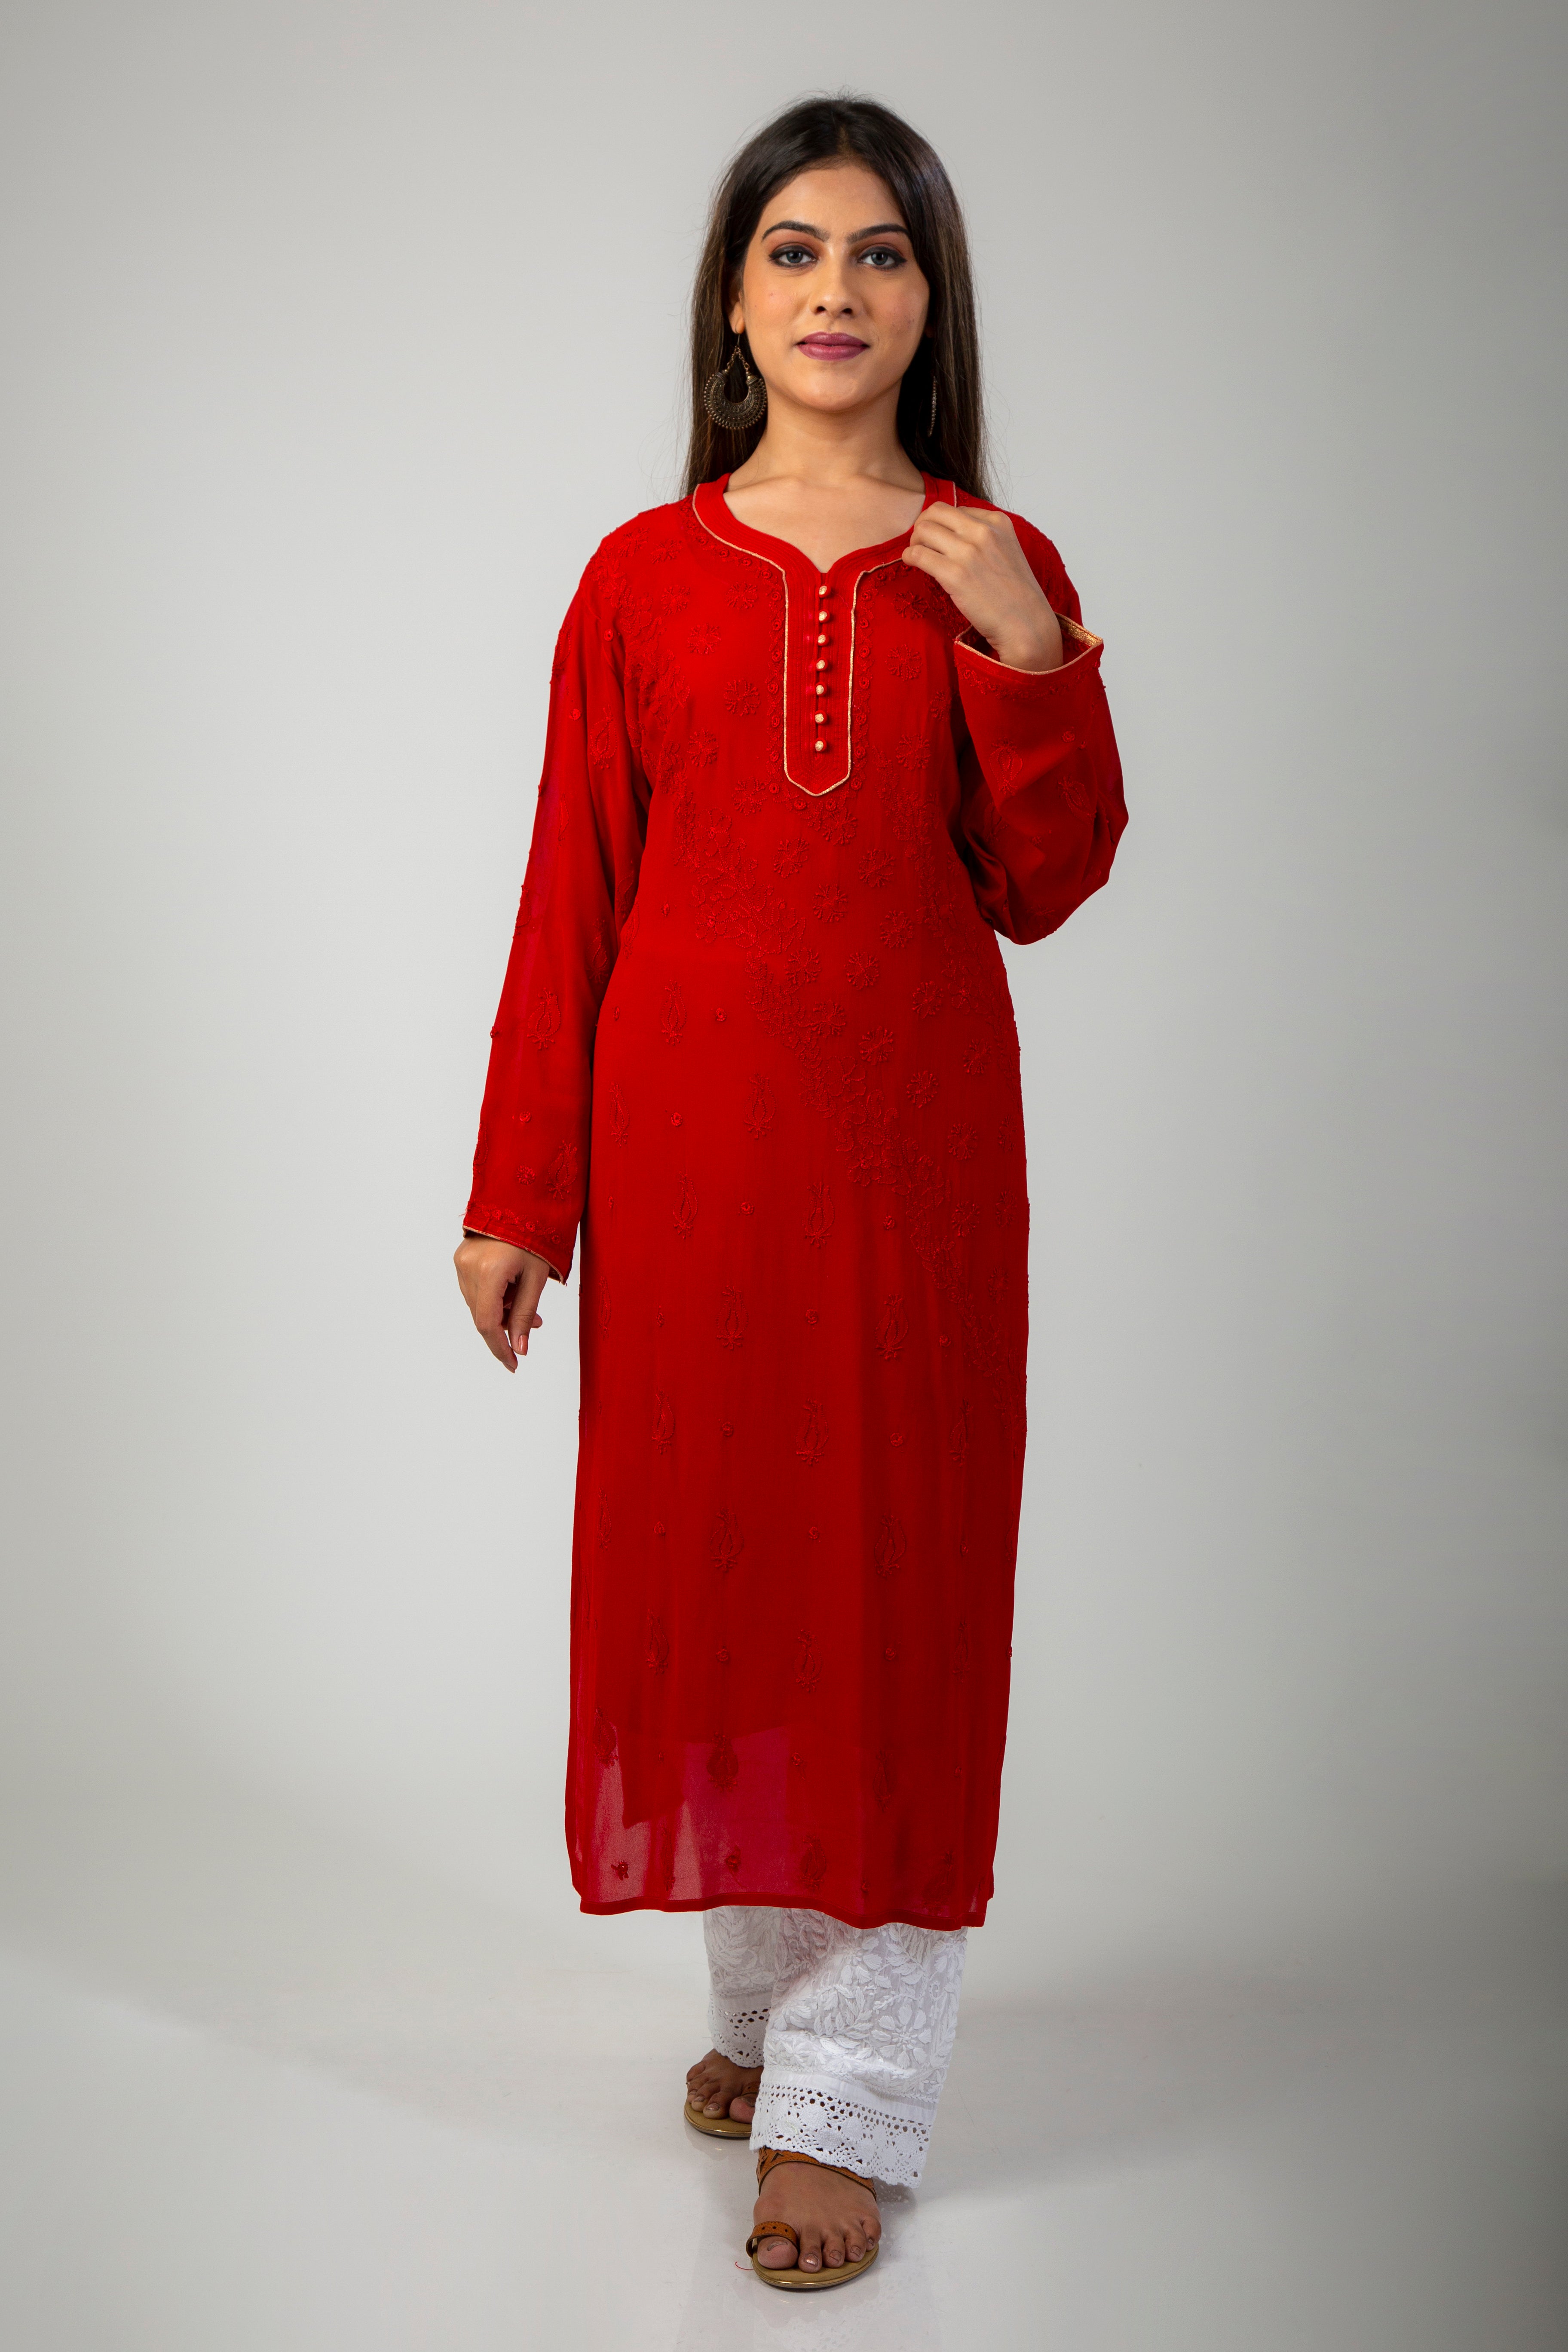 Shop Now for the Red Chikankari Georgette Kurti : Create #AliaBhatt Look  with Jeans | Bollywood fashion, Red kurti, Indian bollywood actress